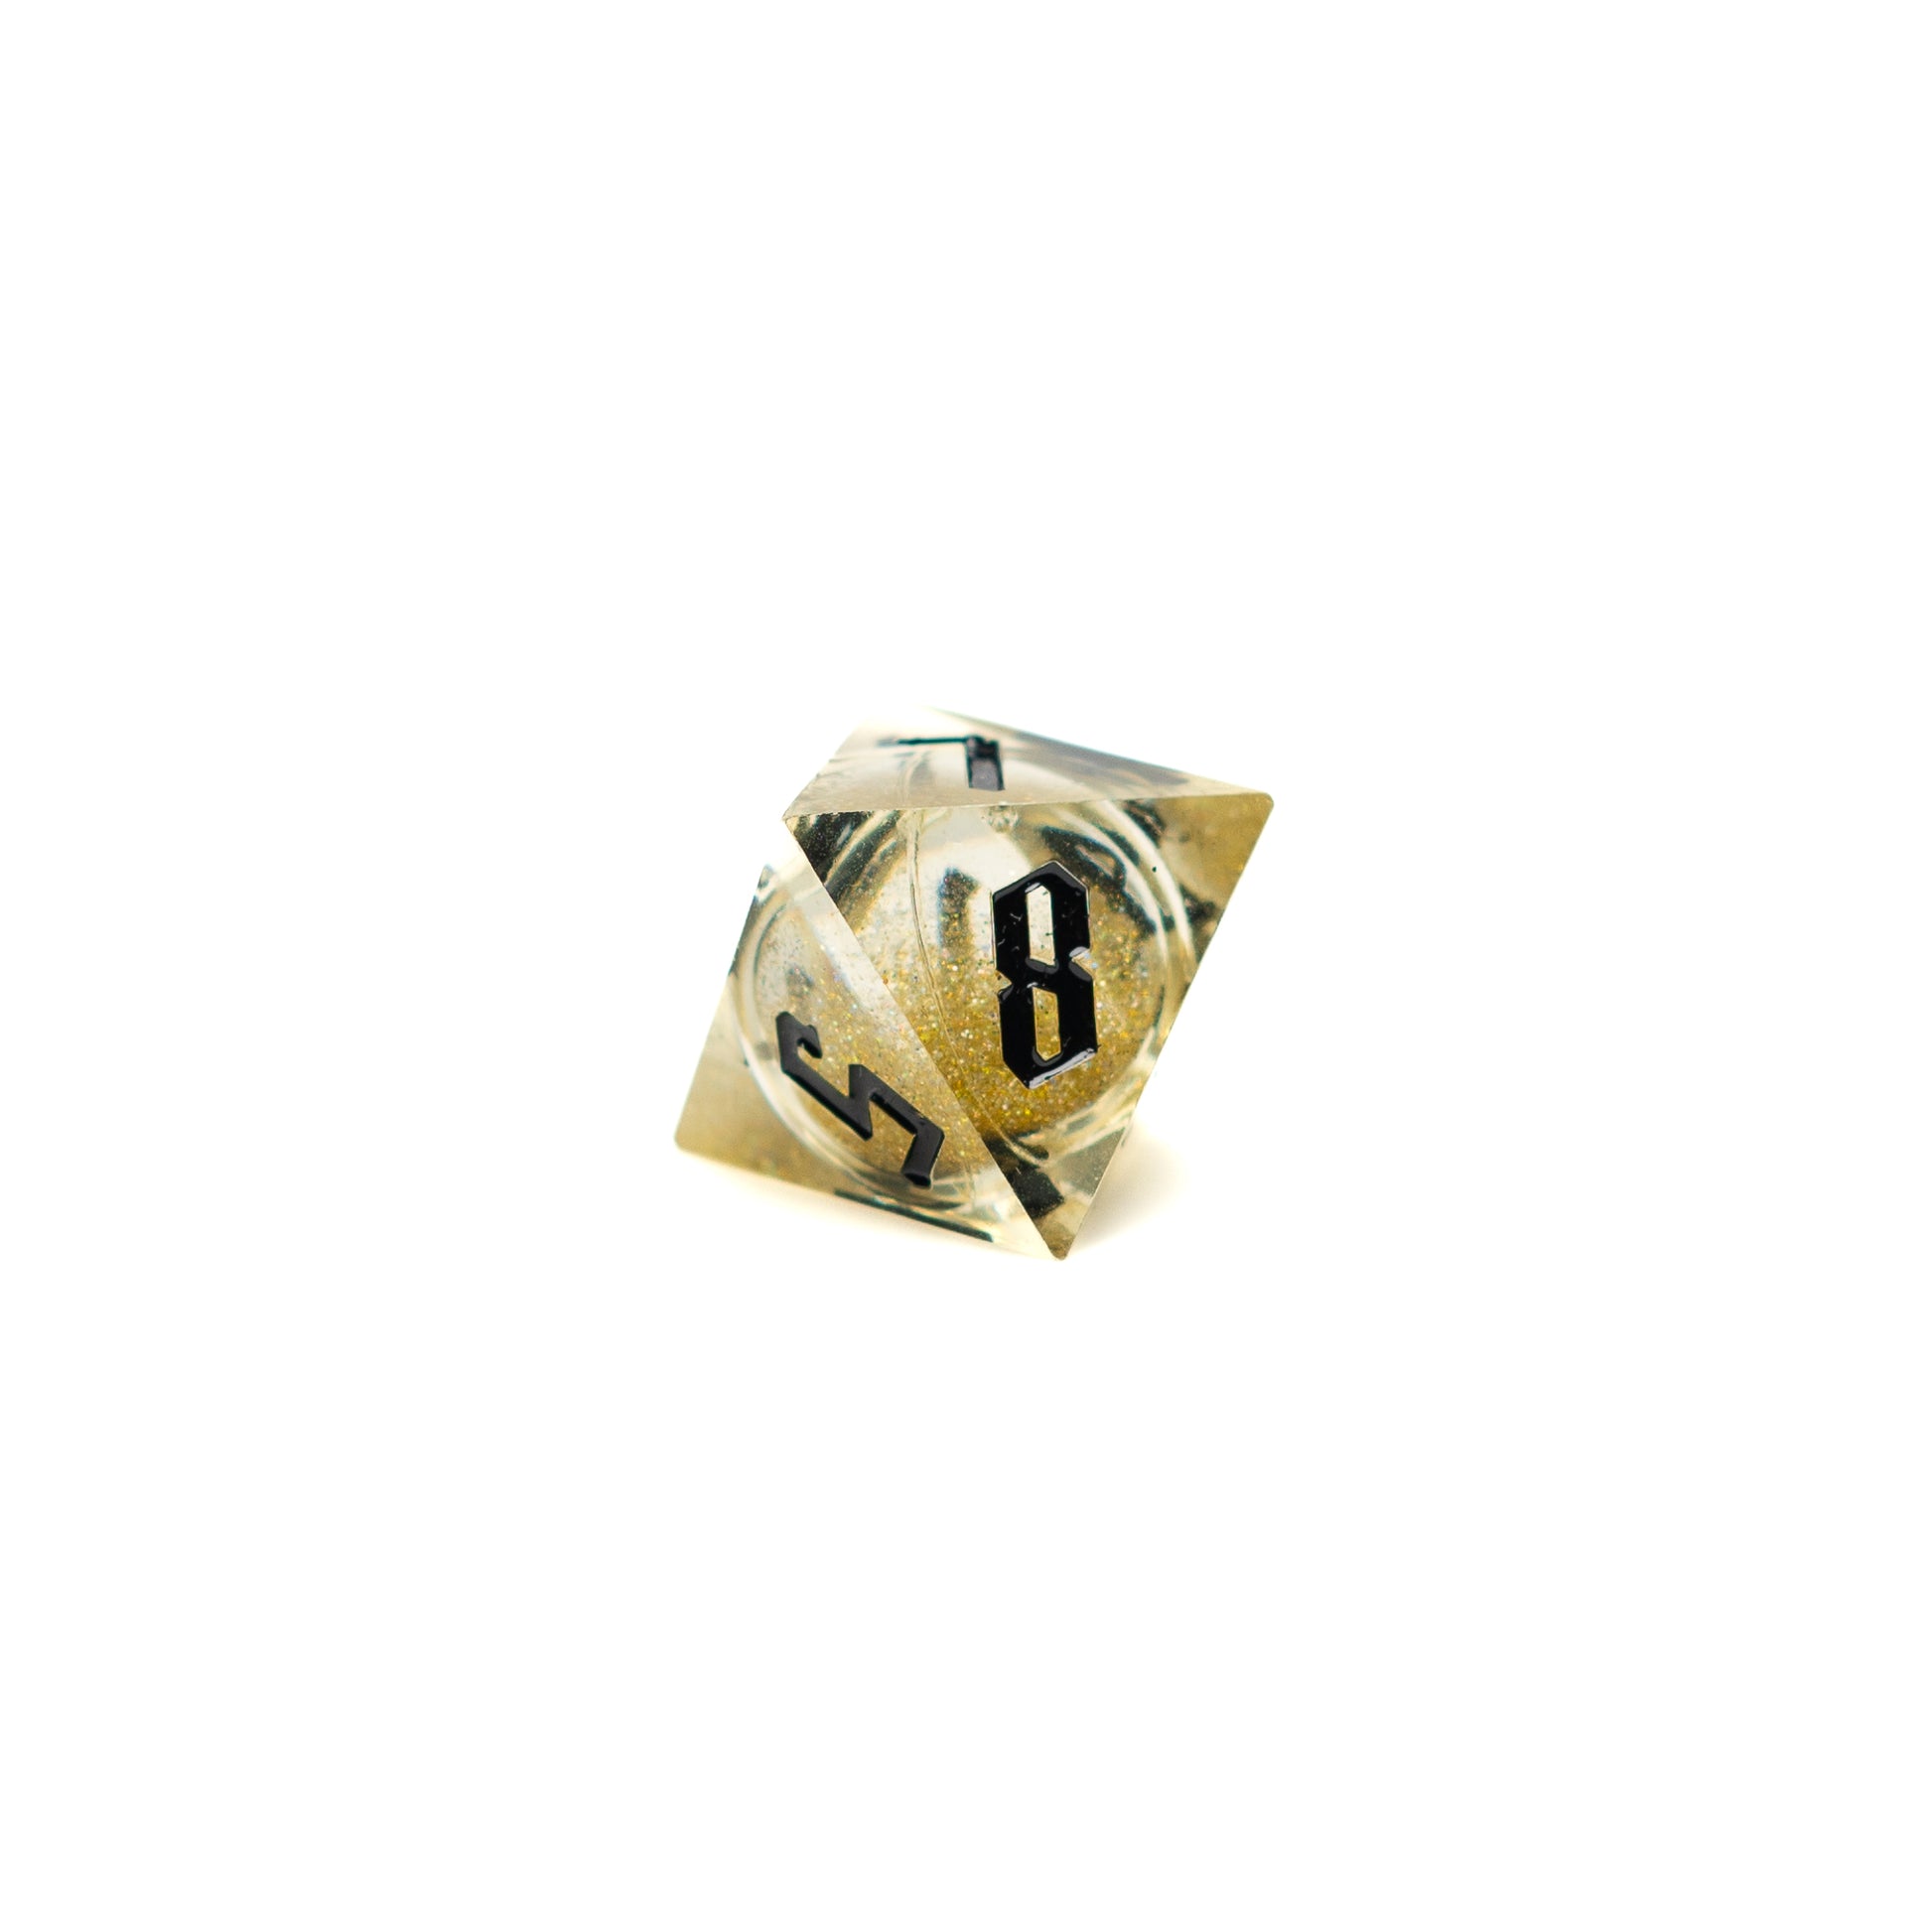 Roll Britannia Sharp Edge Resin Liquid Core Dungeons and Dragons D8 Dice with Gold Glitter Aesthetic